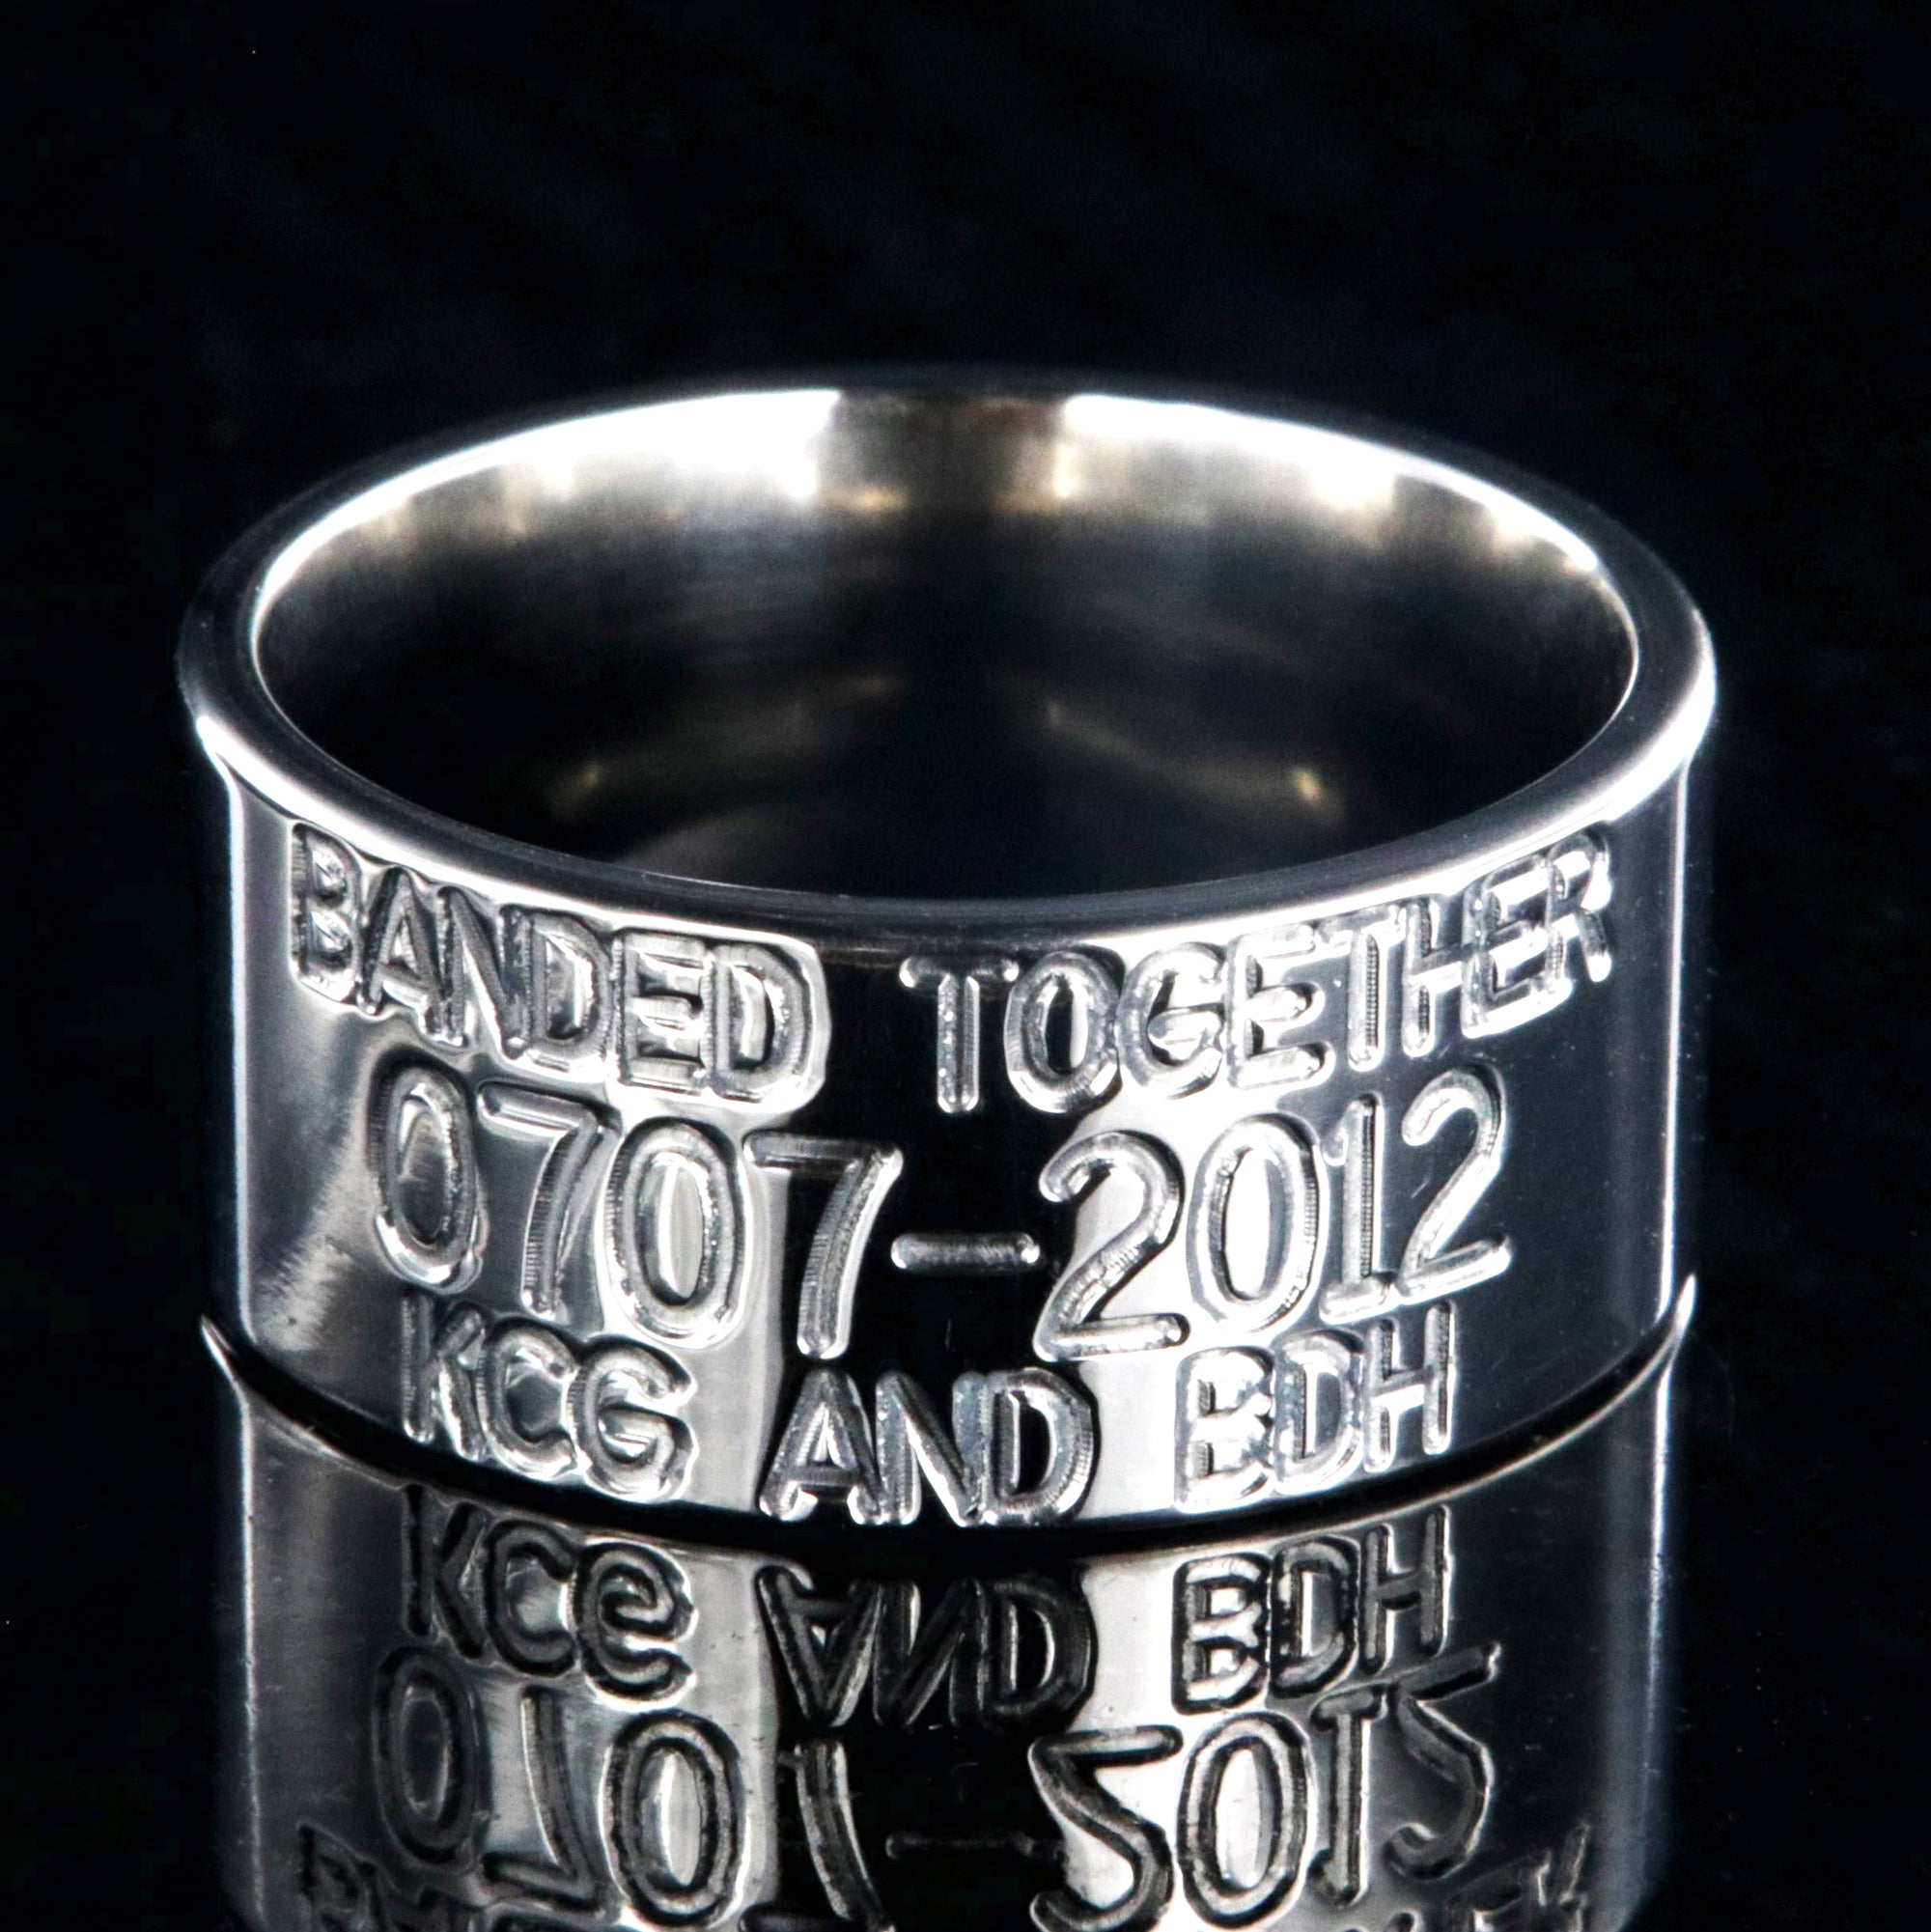 10mm wide titanium duck band wedding ring with polished finish, flat profile, and 3 lines of personalized text